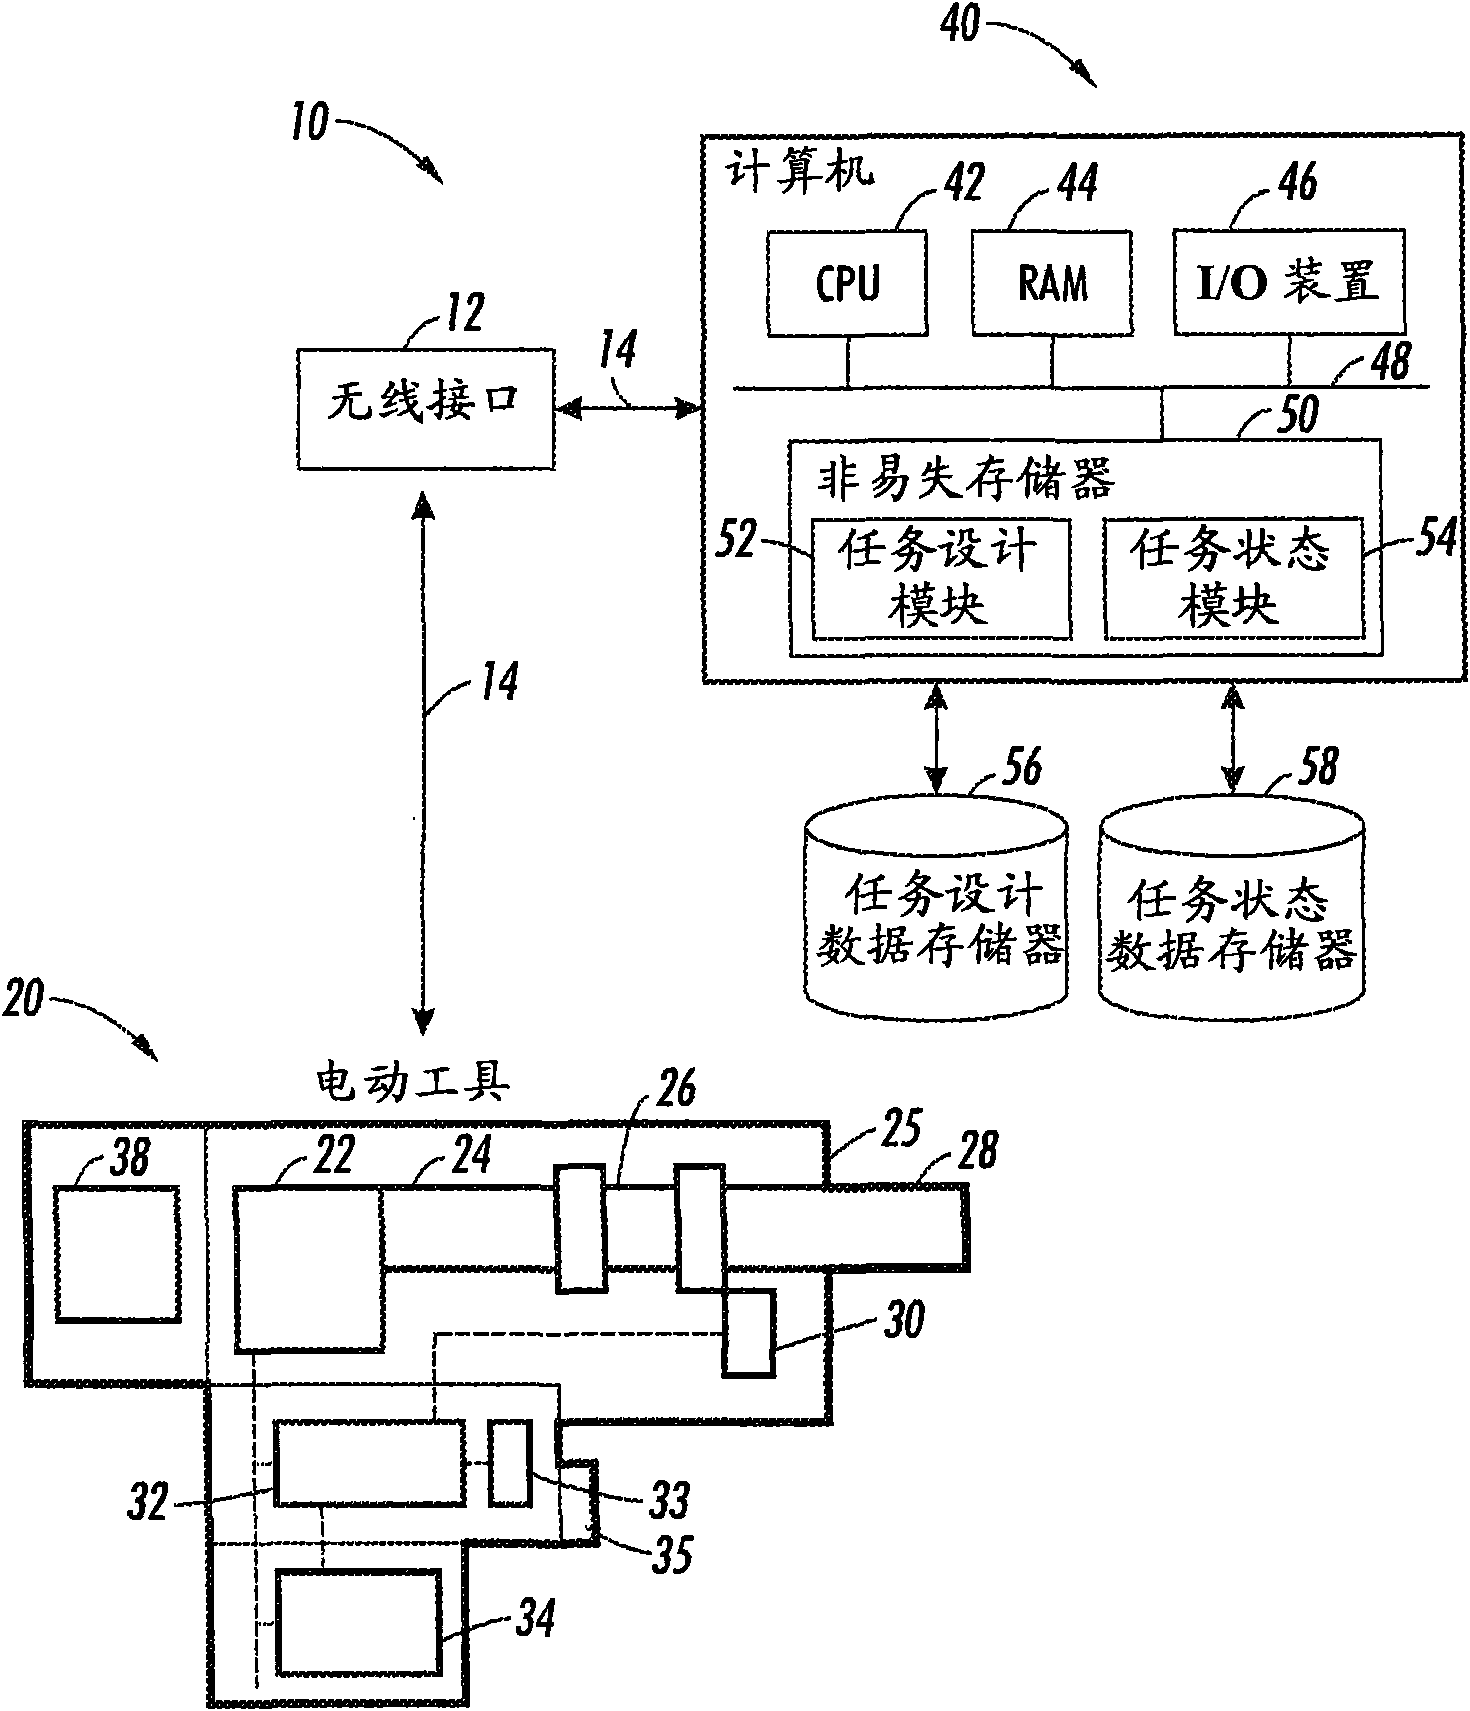 System for reliable collaborative assembly and maintenance of complex systems